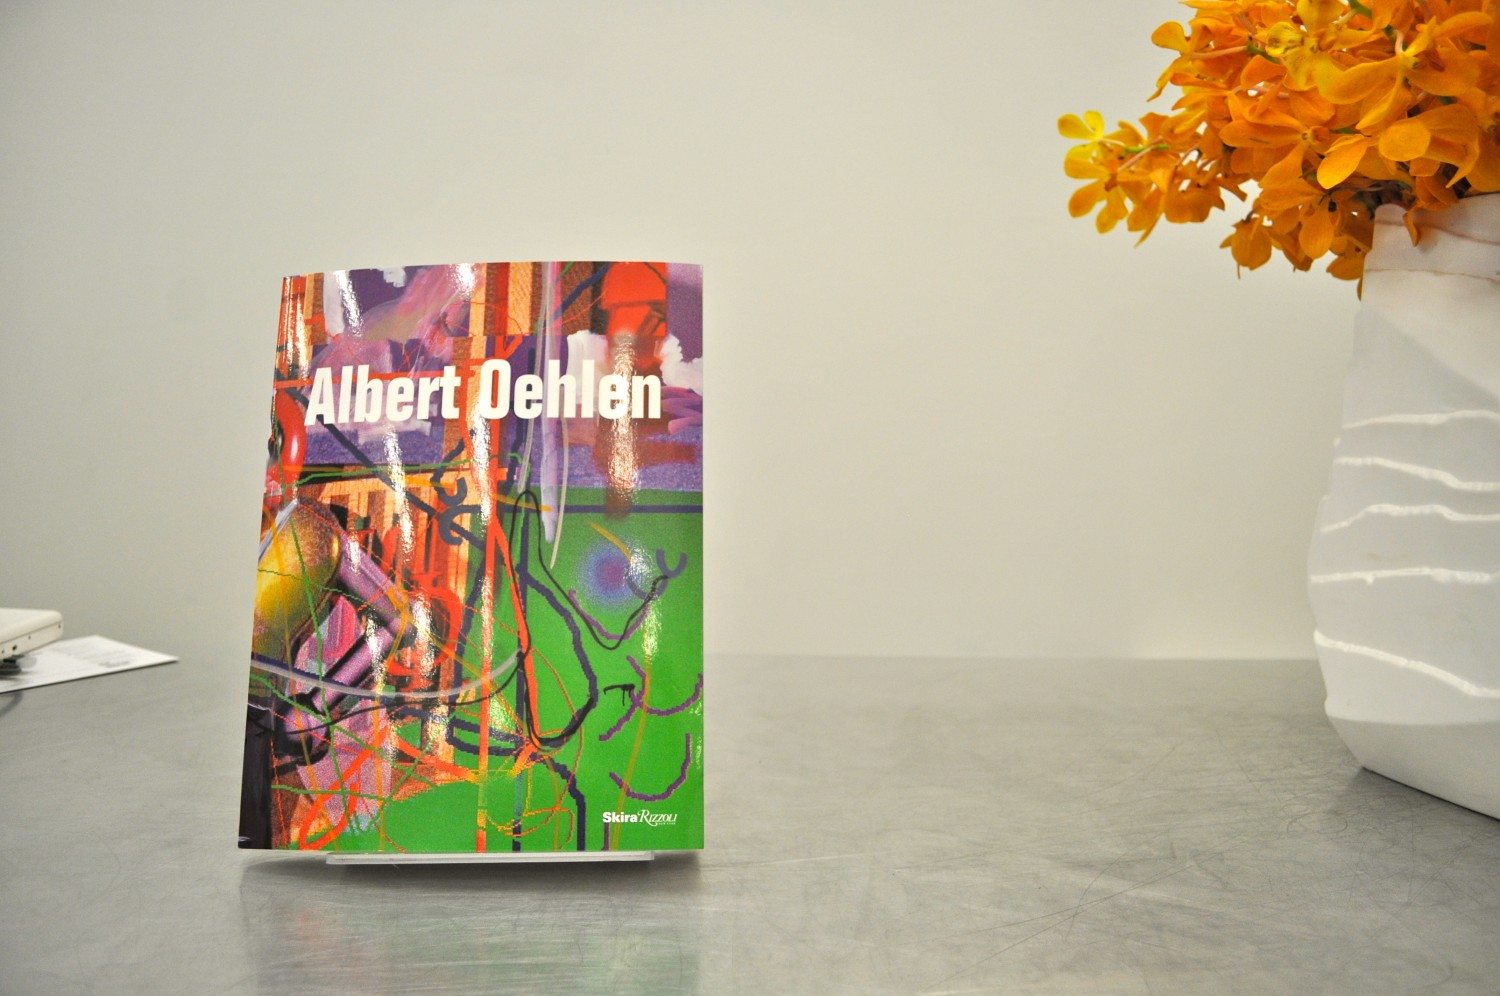 Albert Oehlen Art Exhibition at The New Museum